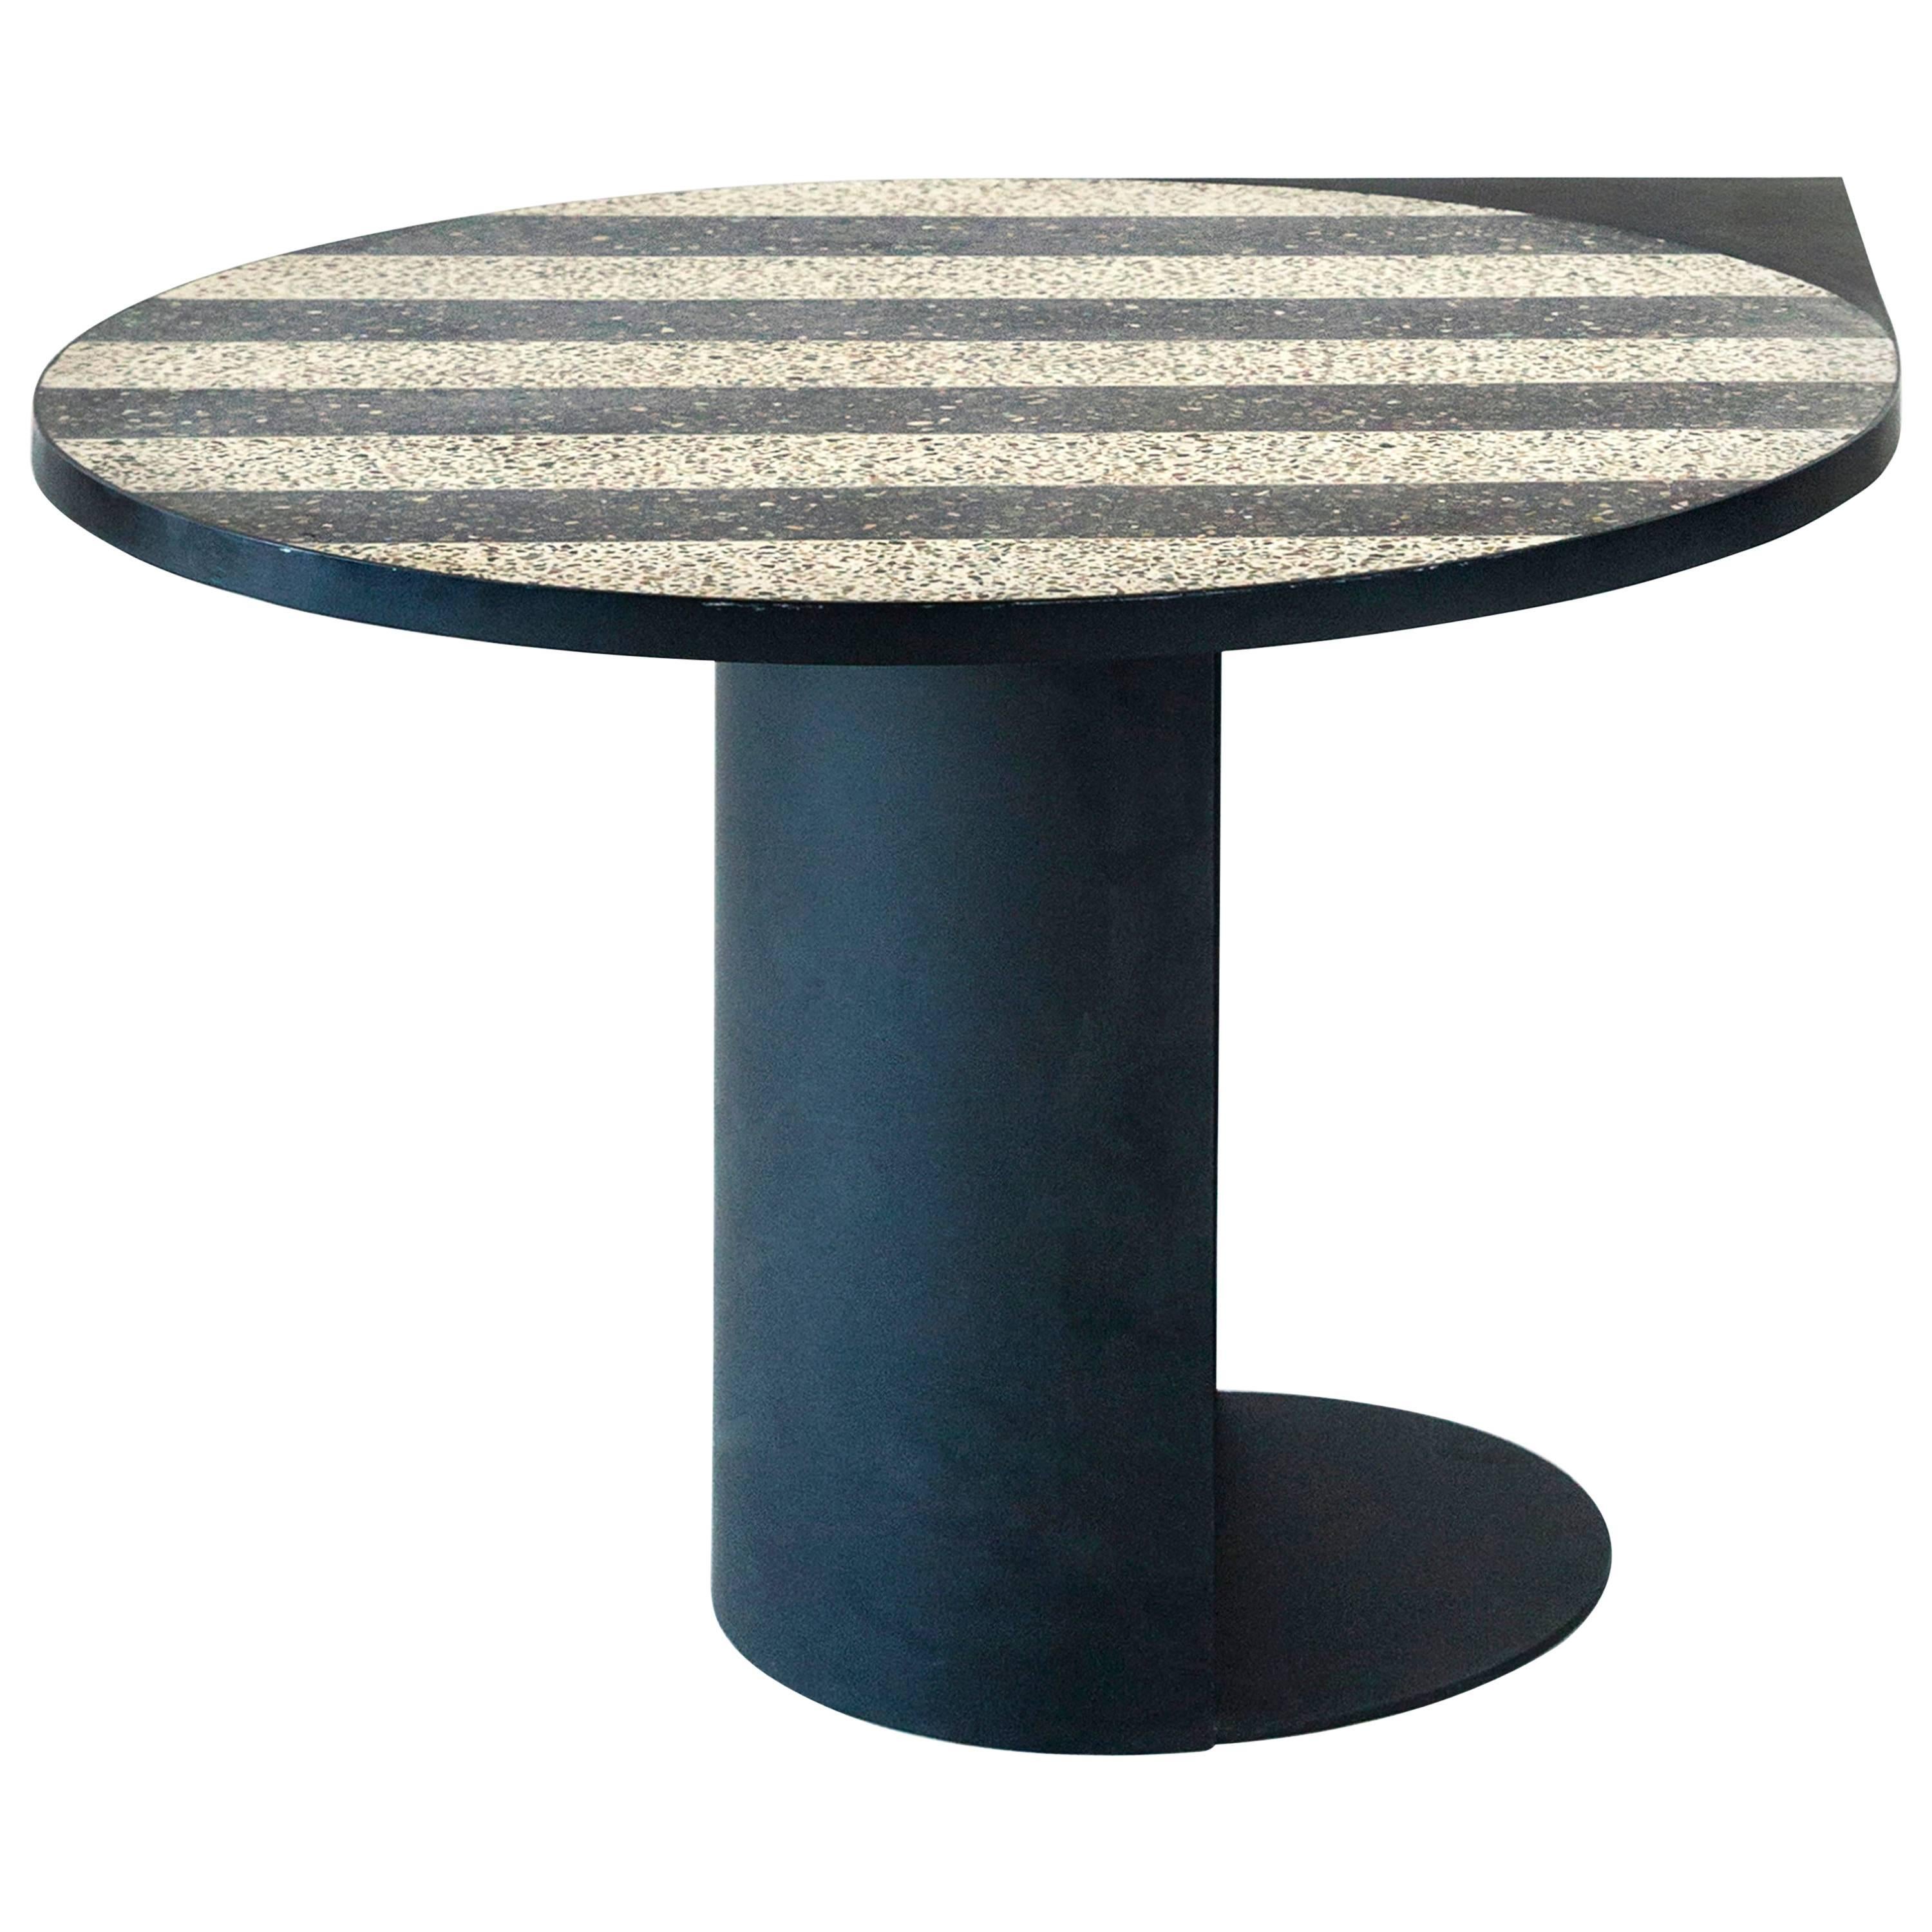 Stripy Mosaic Brass Table, Rooms